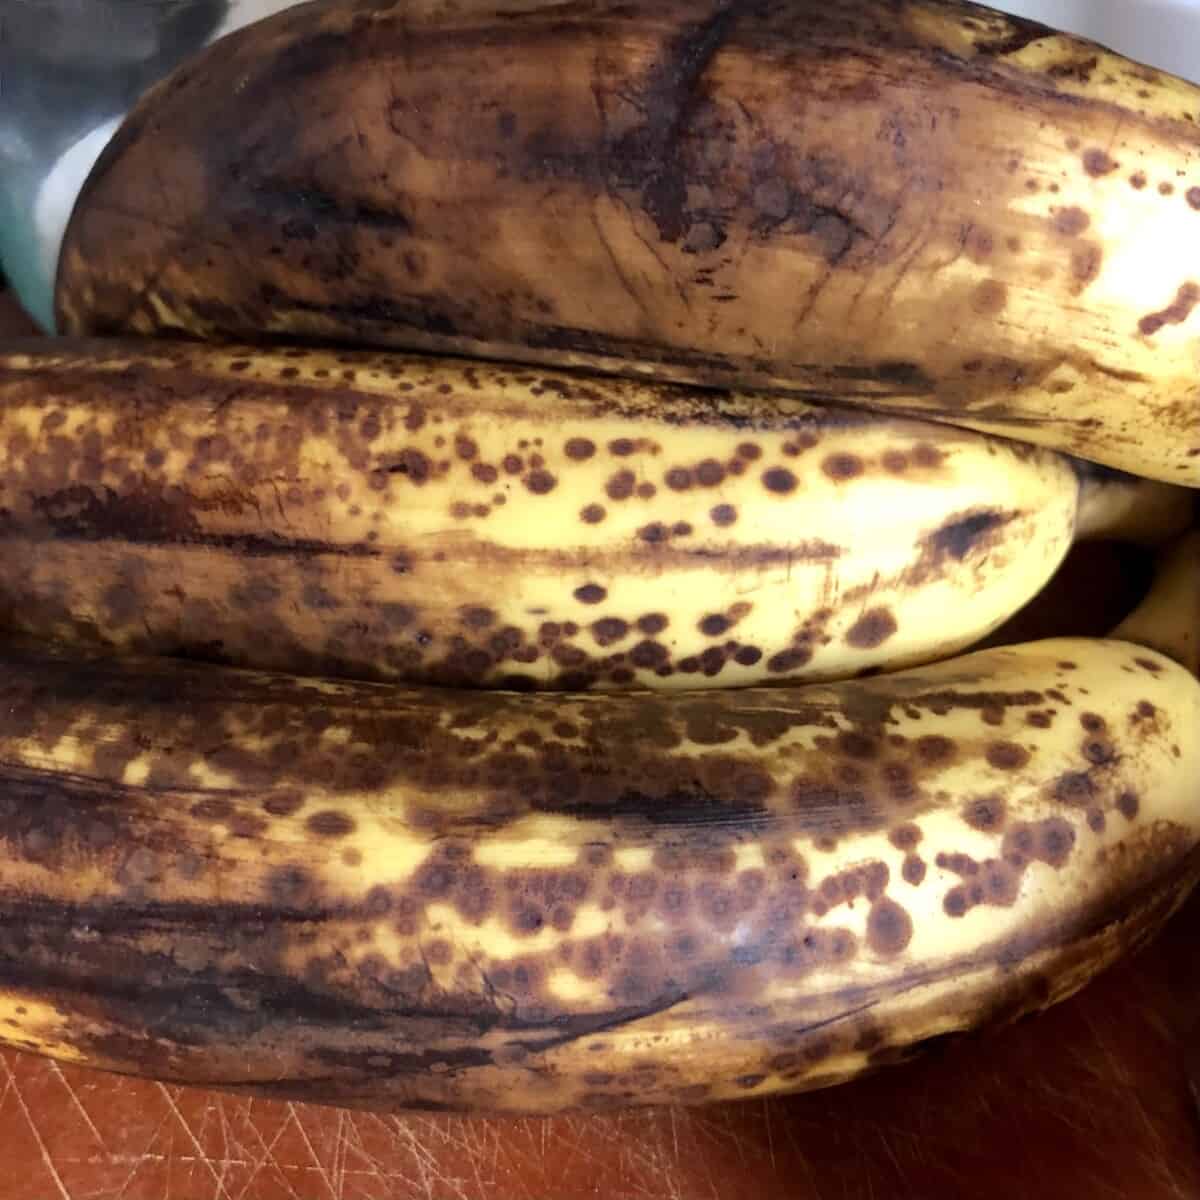 3 overly ripe black and brown-spotted bananas closeup